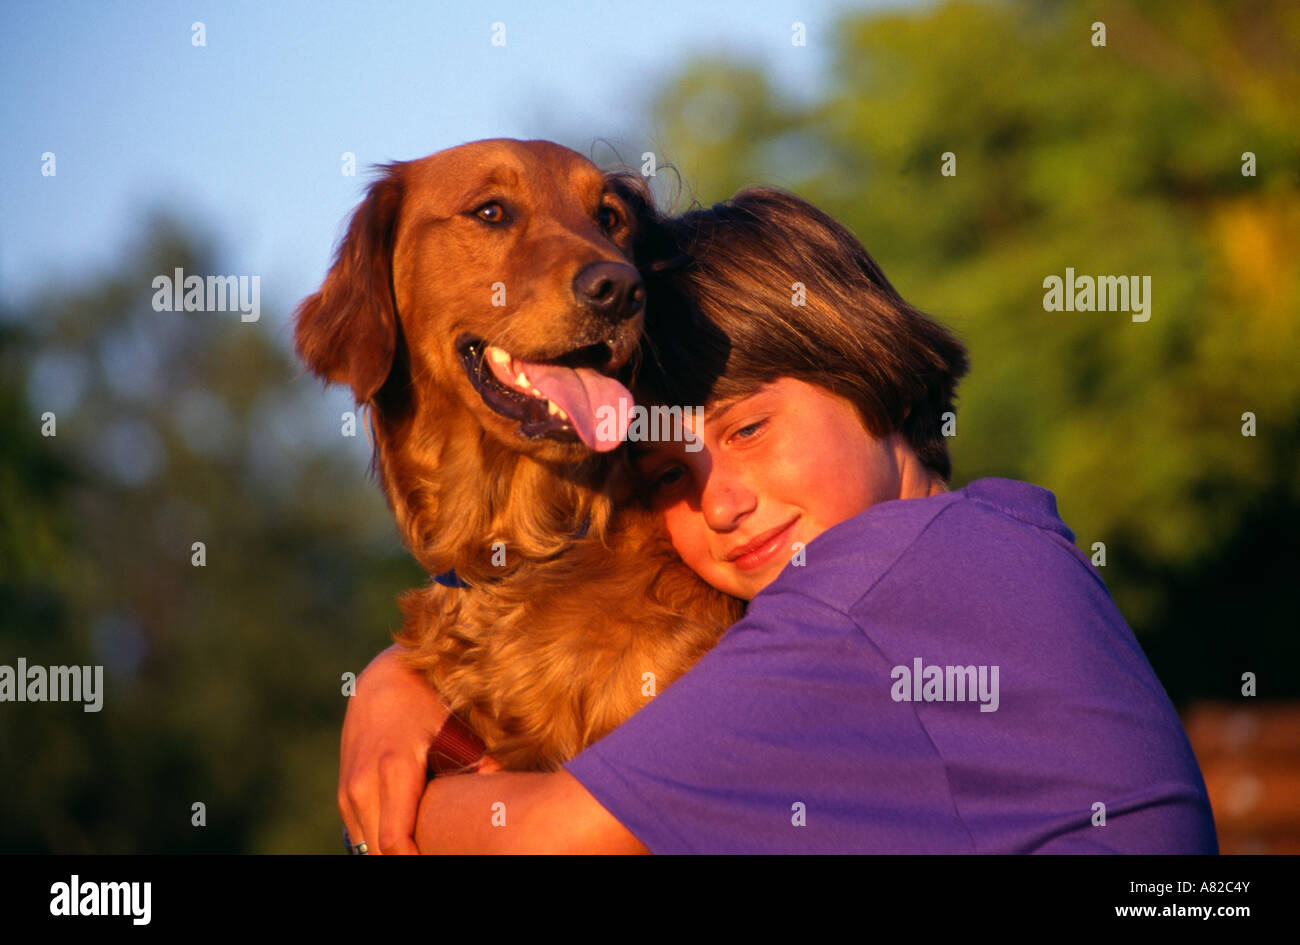 Young girl 8-10 year old hugging Irish Setter dog redhead red fur late summer afternoon front view close up US USA United States MR  © Myrleen Pearson Stock Photo